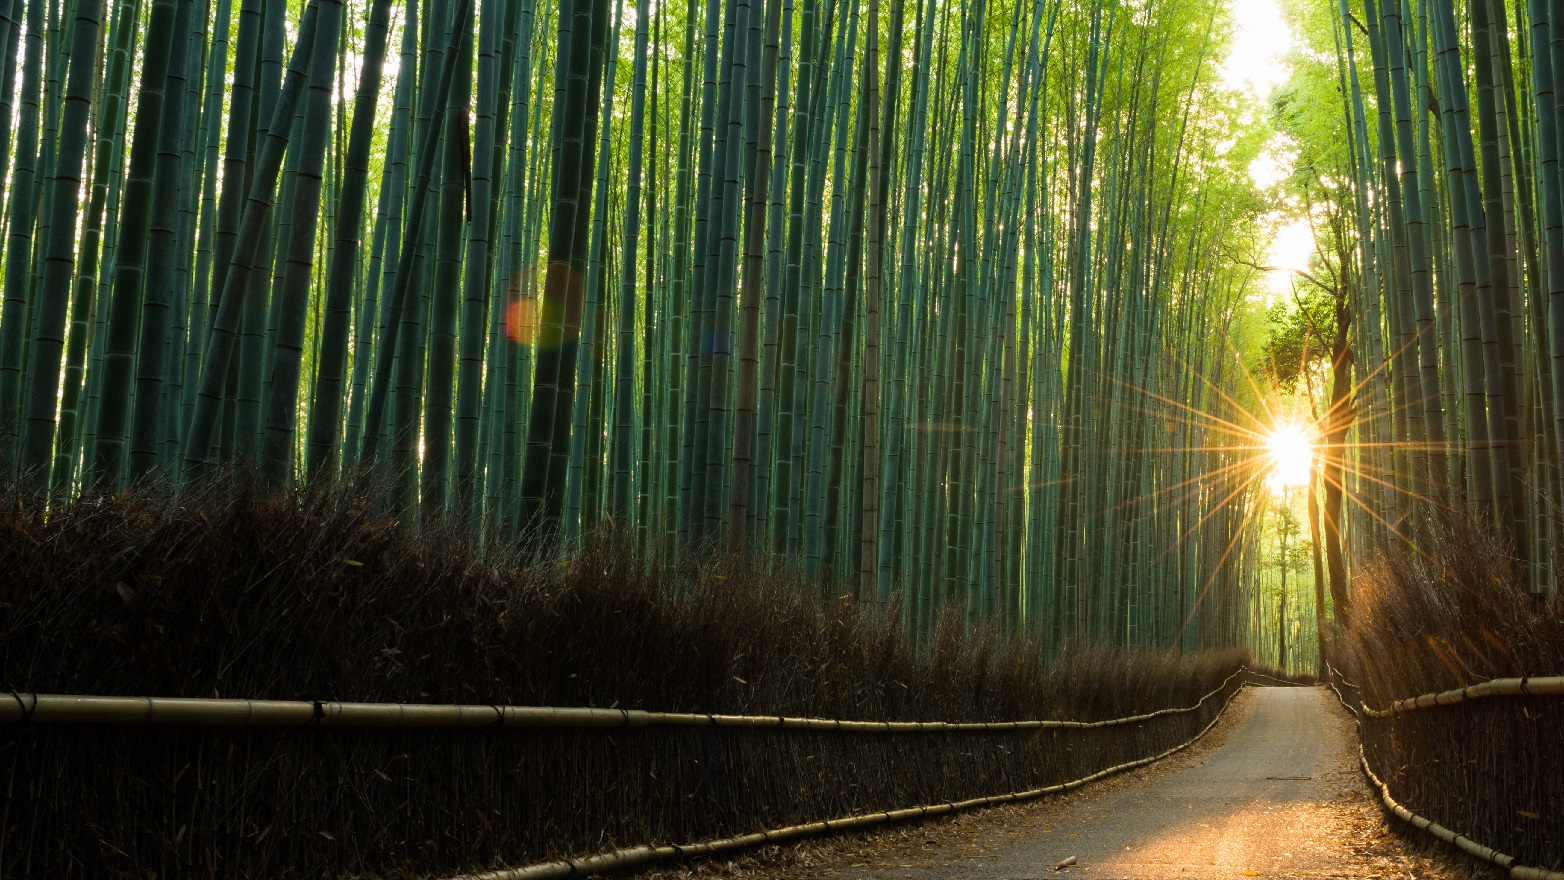 sunrays shining between a path of bamboo trees